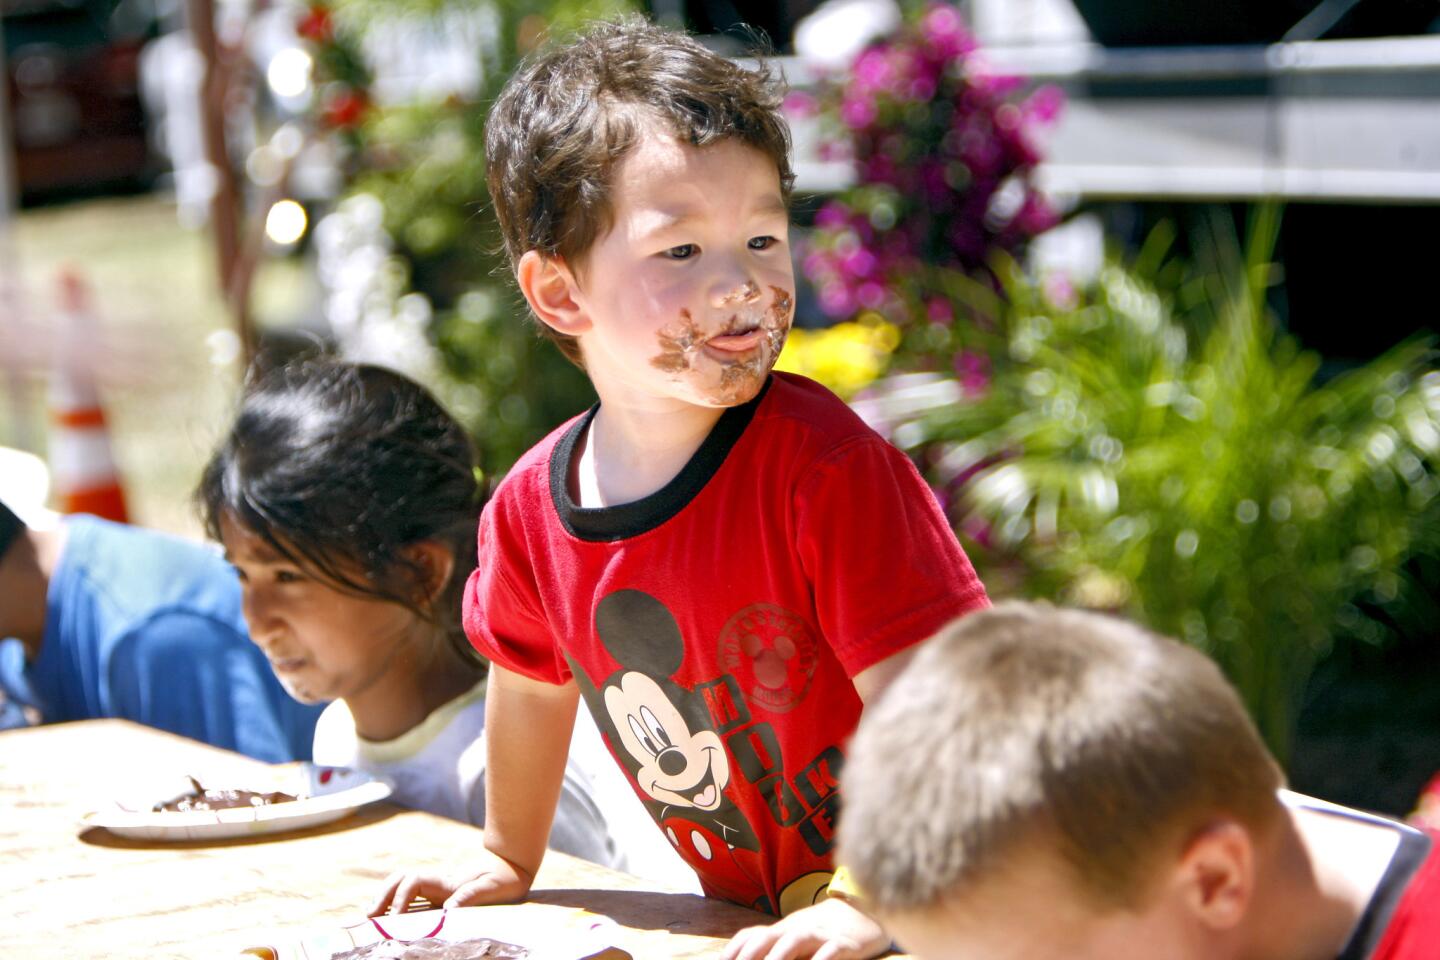 With a face full of chocolate, contestant Jacob Faust, 3 of La Crescenta, stops to look over the competition during the Pie Eating contest at the annual La Crescenta Country Fair, at Crescenta Valley Park in La Crescenta on Saturday, April 29, 2017.